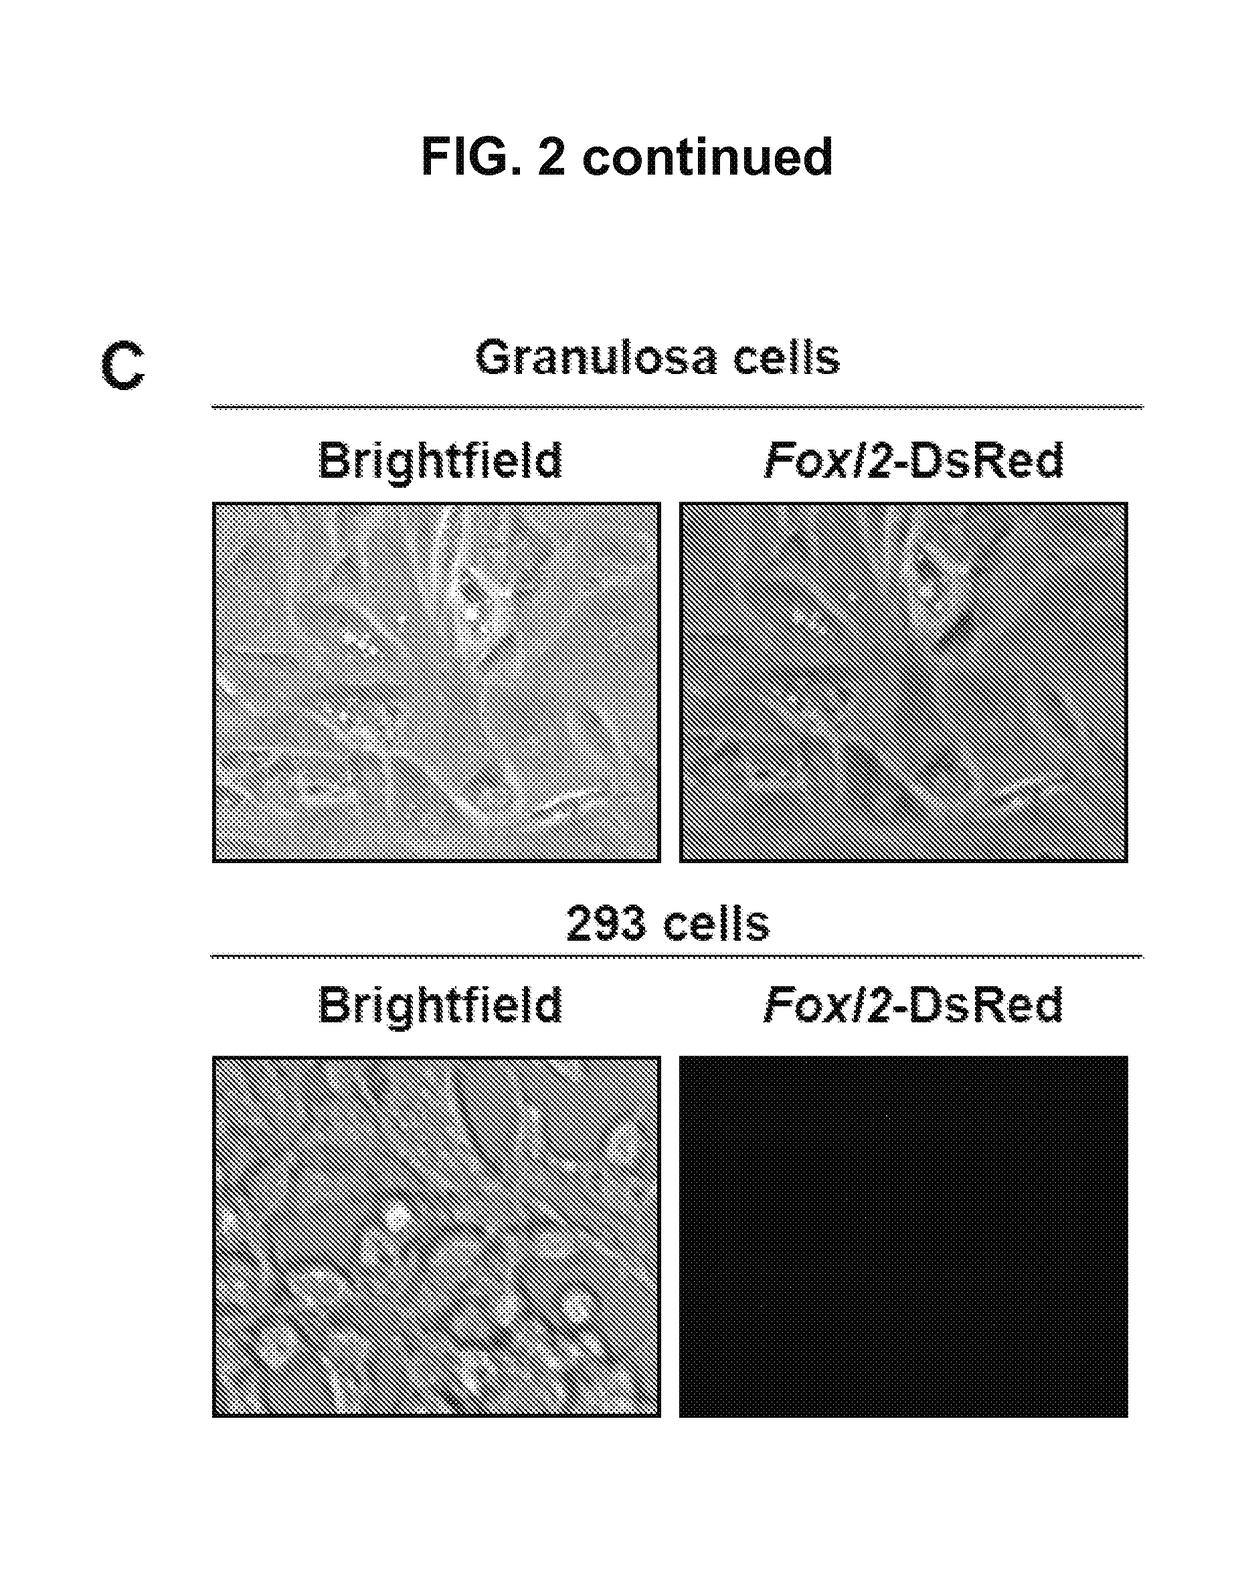 Methods for growth and maturation of ovarian follicles